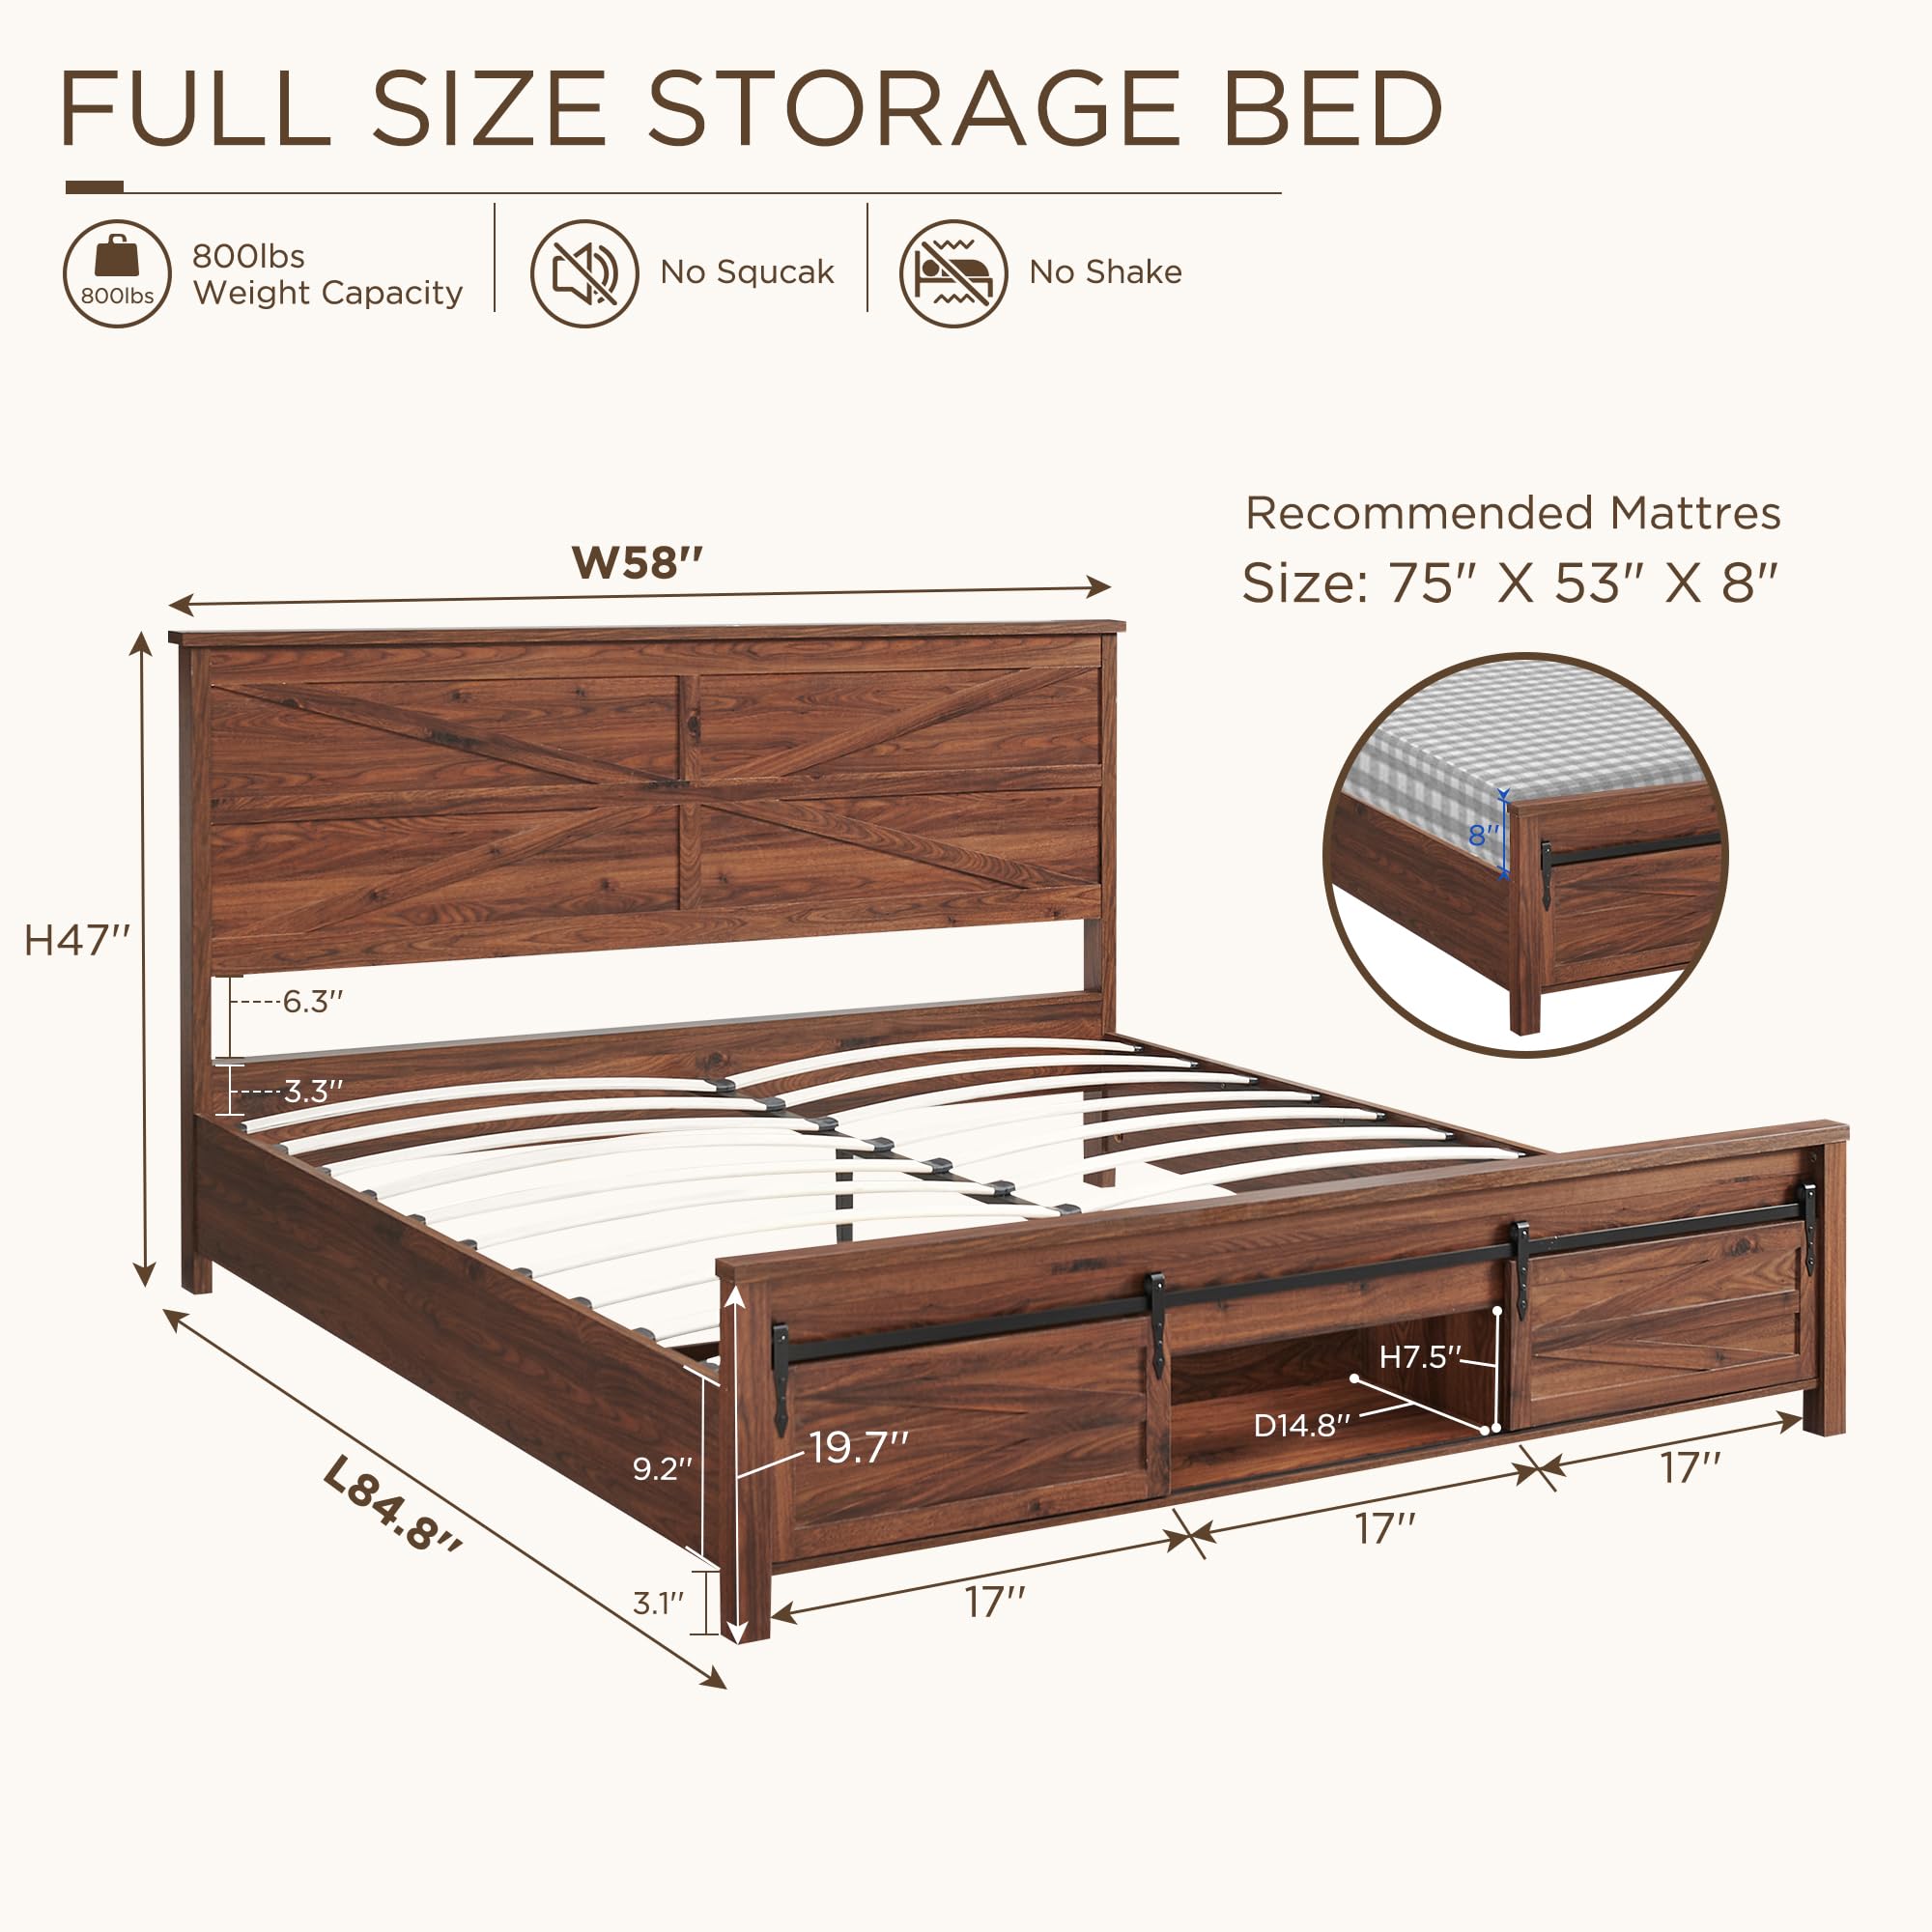 JXQTLINGMU Farmhouse Wood Bed Frame Full Size with Sliding Barn Door Storage Cabinets and Headboard, Solid Wood Slats Support, Noiseless, No Box Spring Needed, Brown